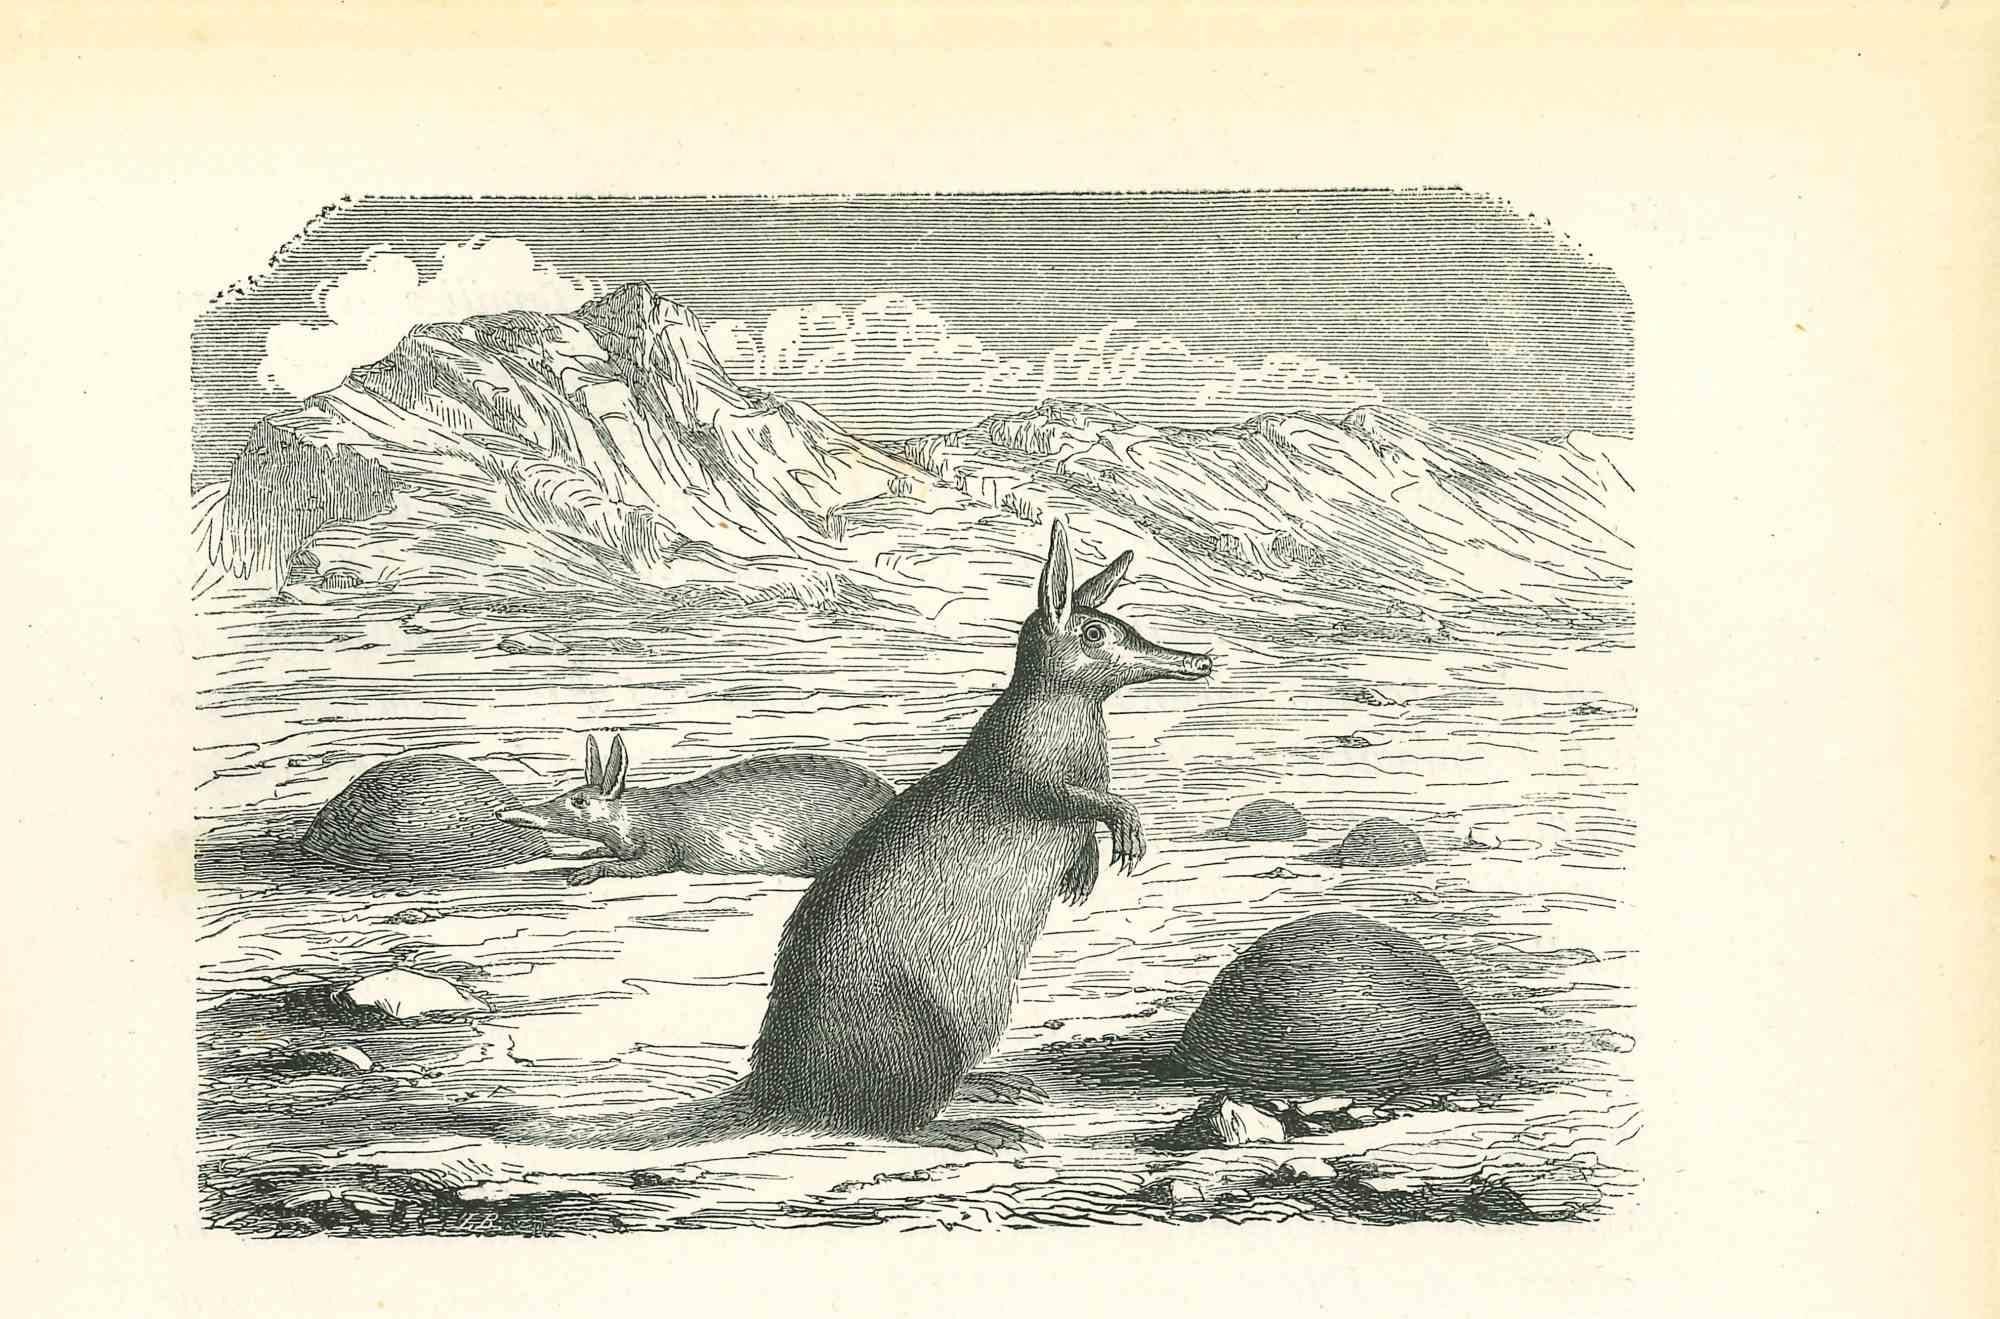 The Kangaroos is an original lithograph on ivory-colored paper, realized by Paul Gervais (1816-1879). The artwork is from The Series of "Les Trois Règnes de la Nature", and was published in 1854.

Good conditions.

With the notes on the rear.

The